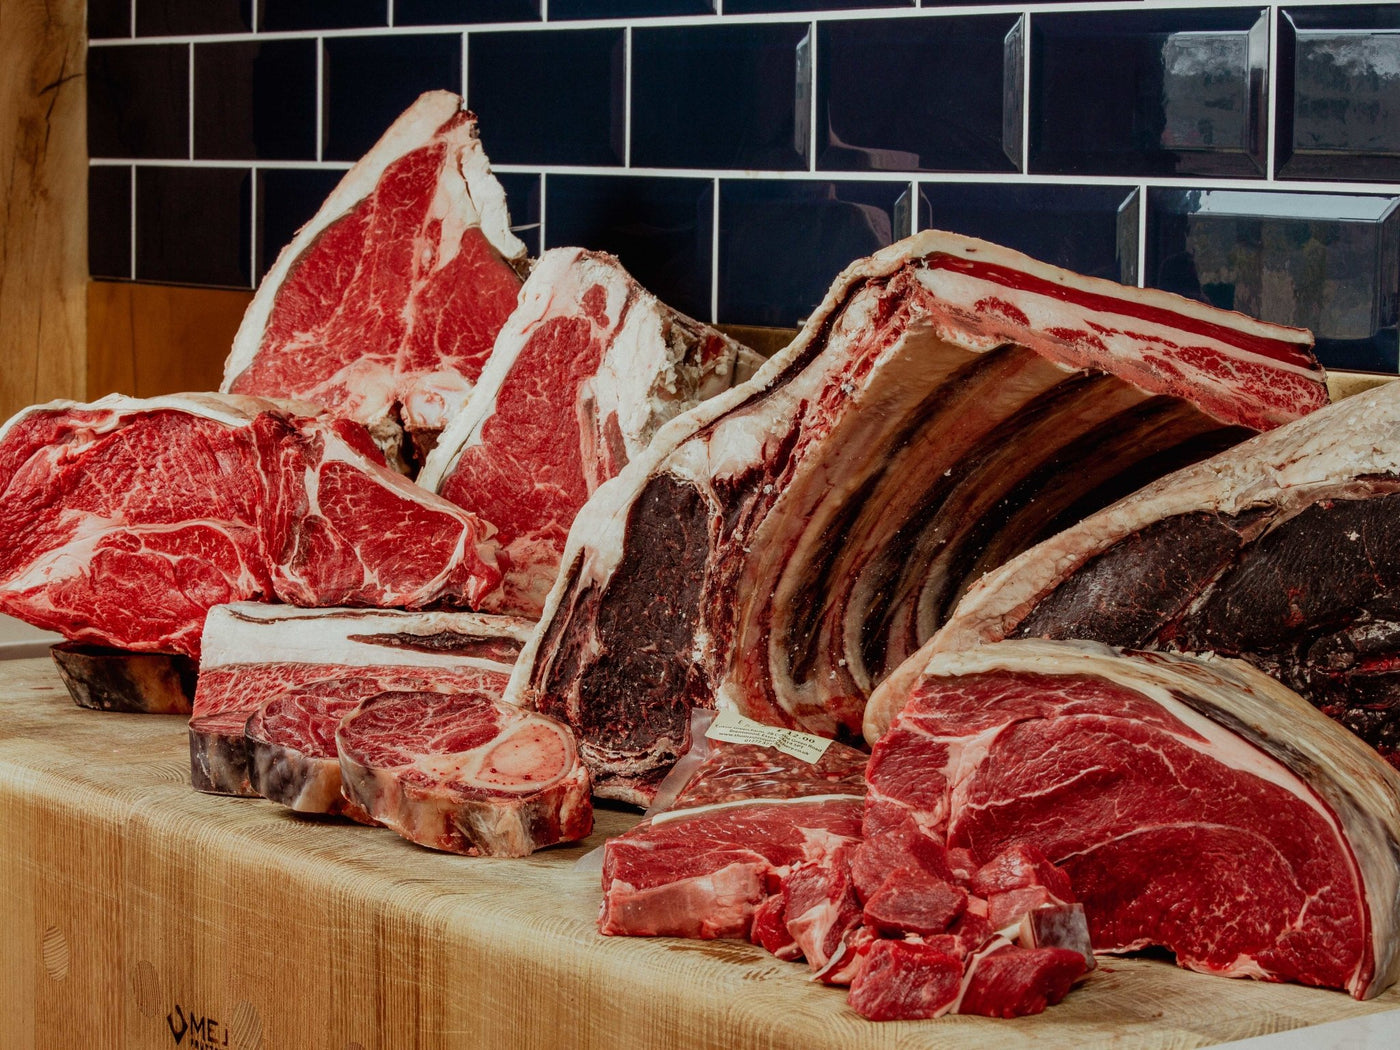 Super 32 Day Dry-Aged Trenchmore Wagyu x Sussex - Thomas Joseph Butchery - Ethical Dry-Aged Meat The Best Steak UK Thomas Joseph Butchery